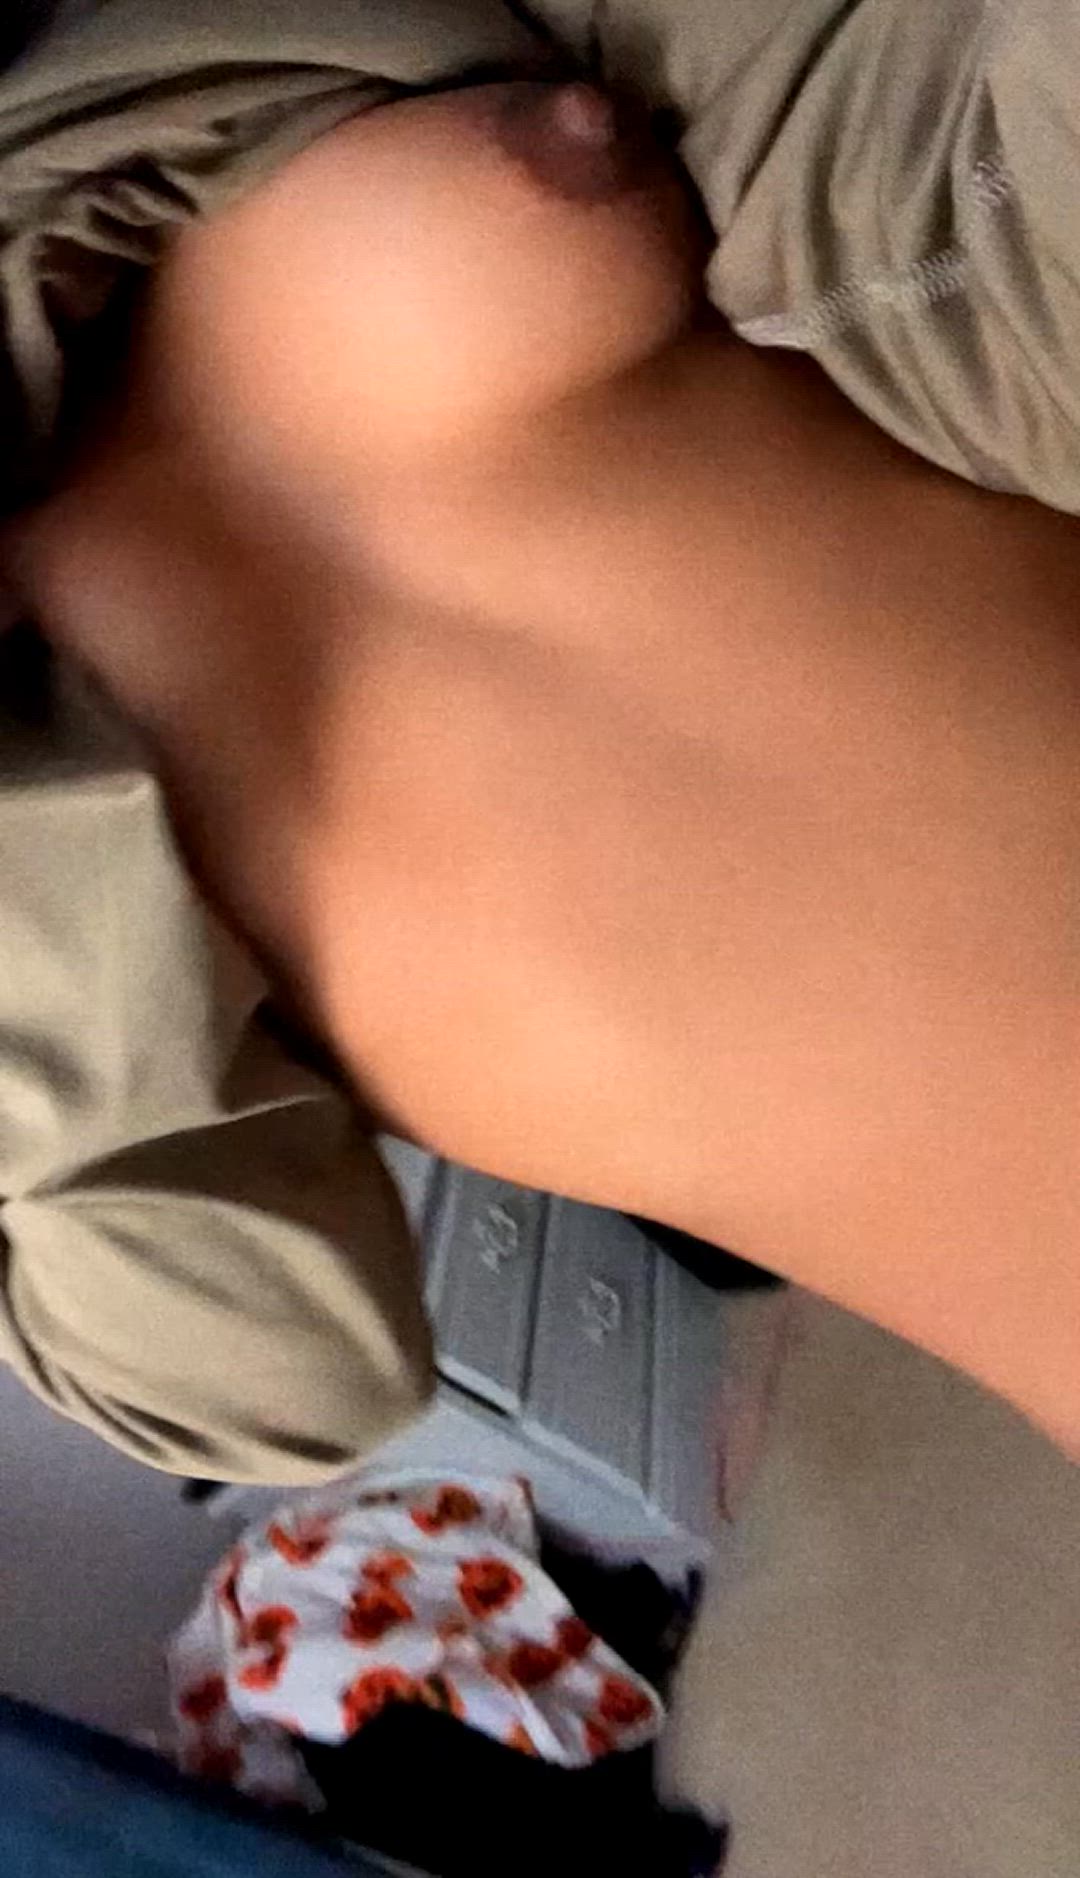 Tits porn video with onlyfans model spicymashishe <strong>@spicymashishe</strong>